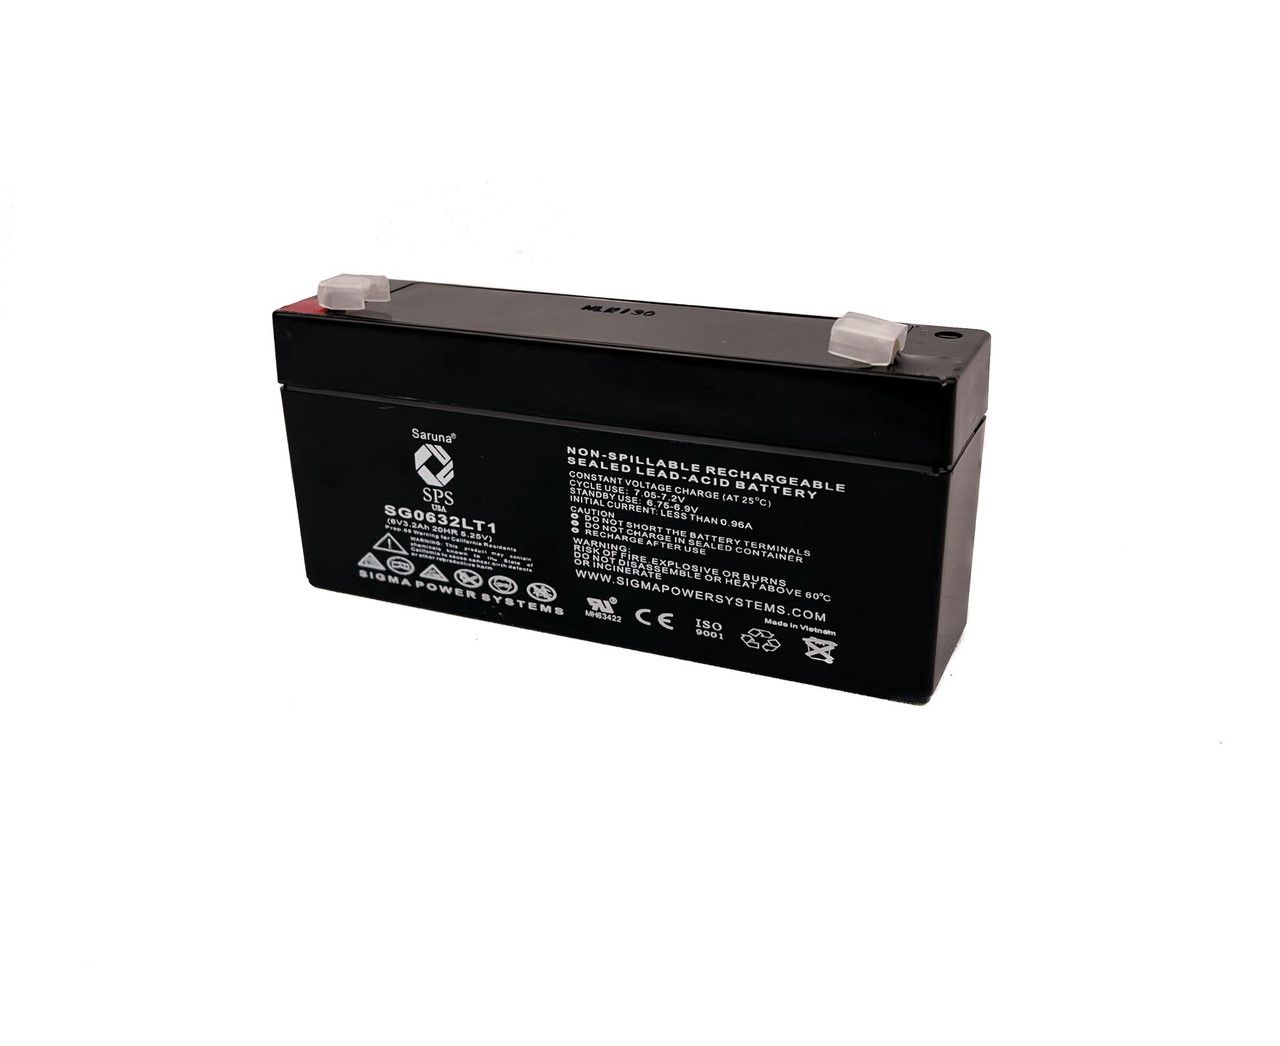 Raion Power 6V 3.2Ah Non-Spillable Replacement Rechargebale Battery for Gaston GT6-3.4